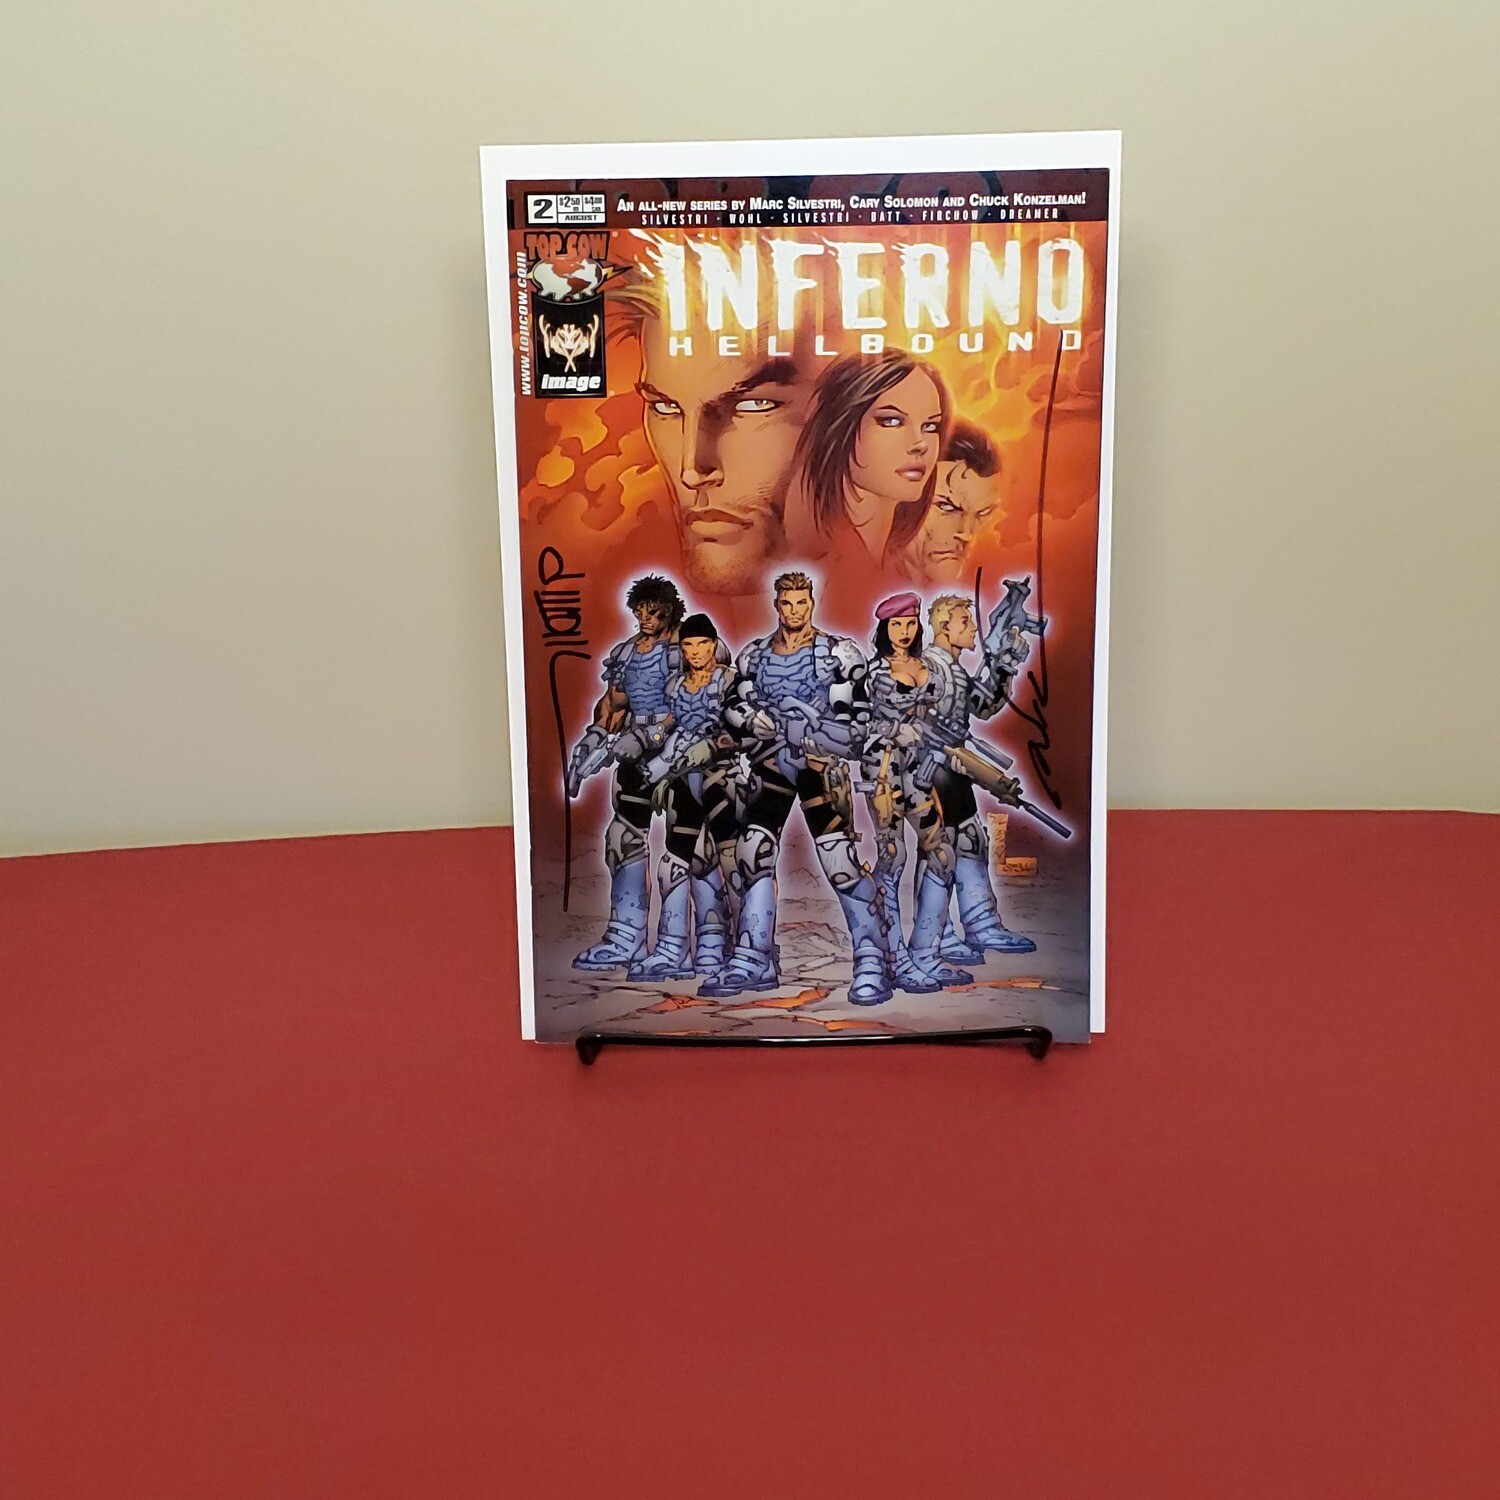 Inferno Hellbound #2 NM Signed by Marc Silverstri and David Wohl